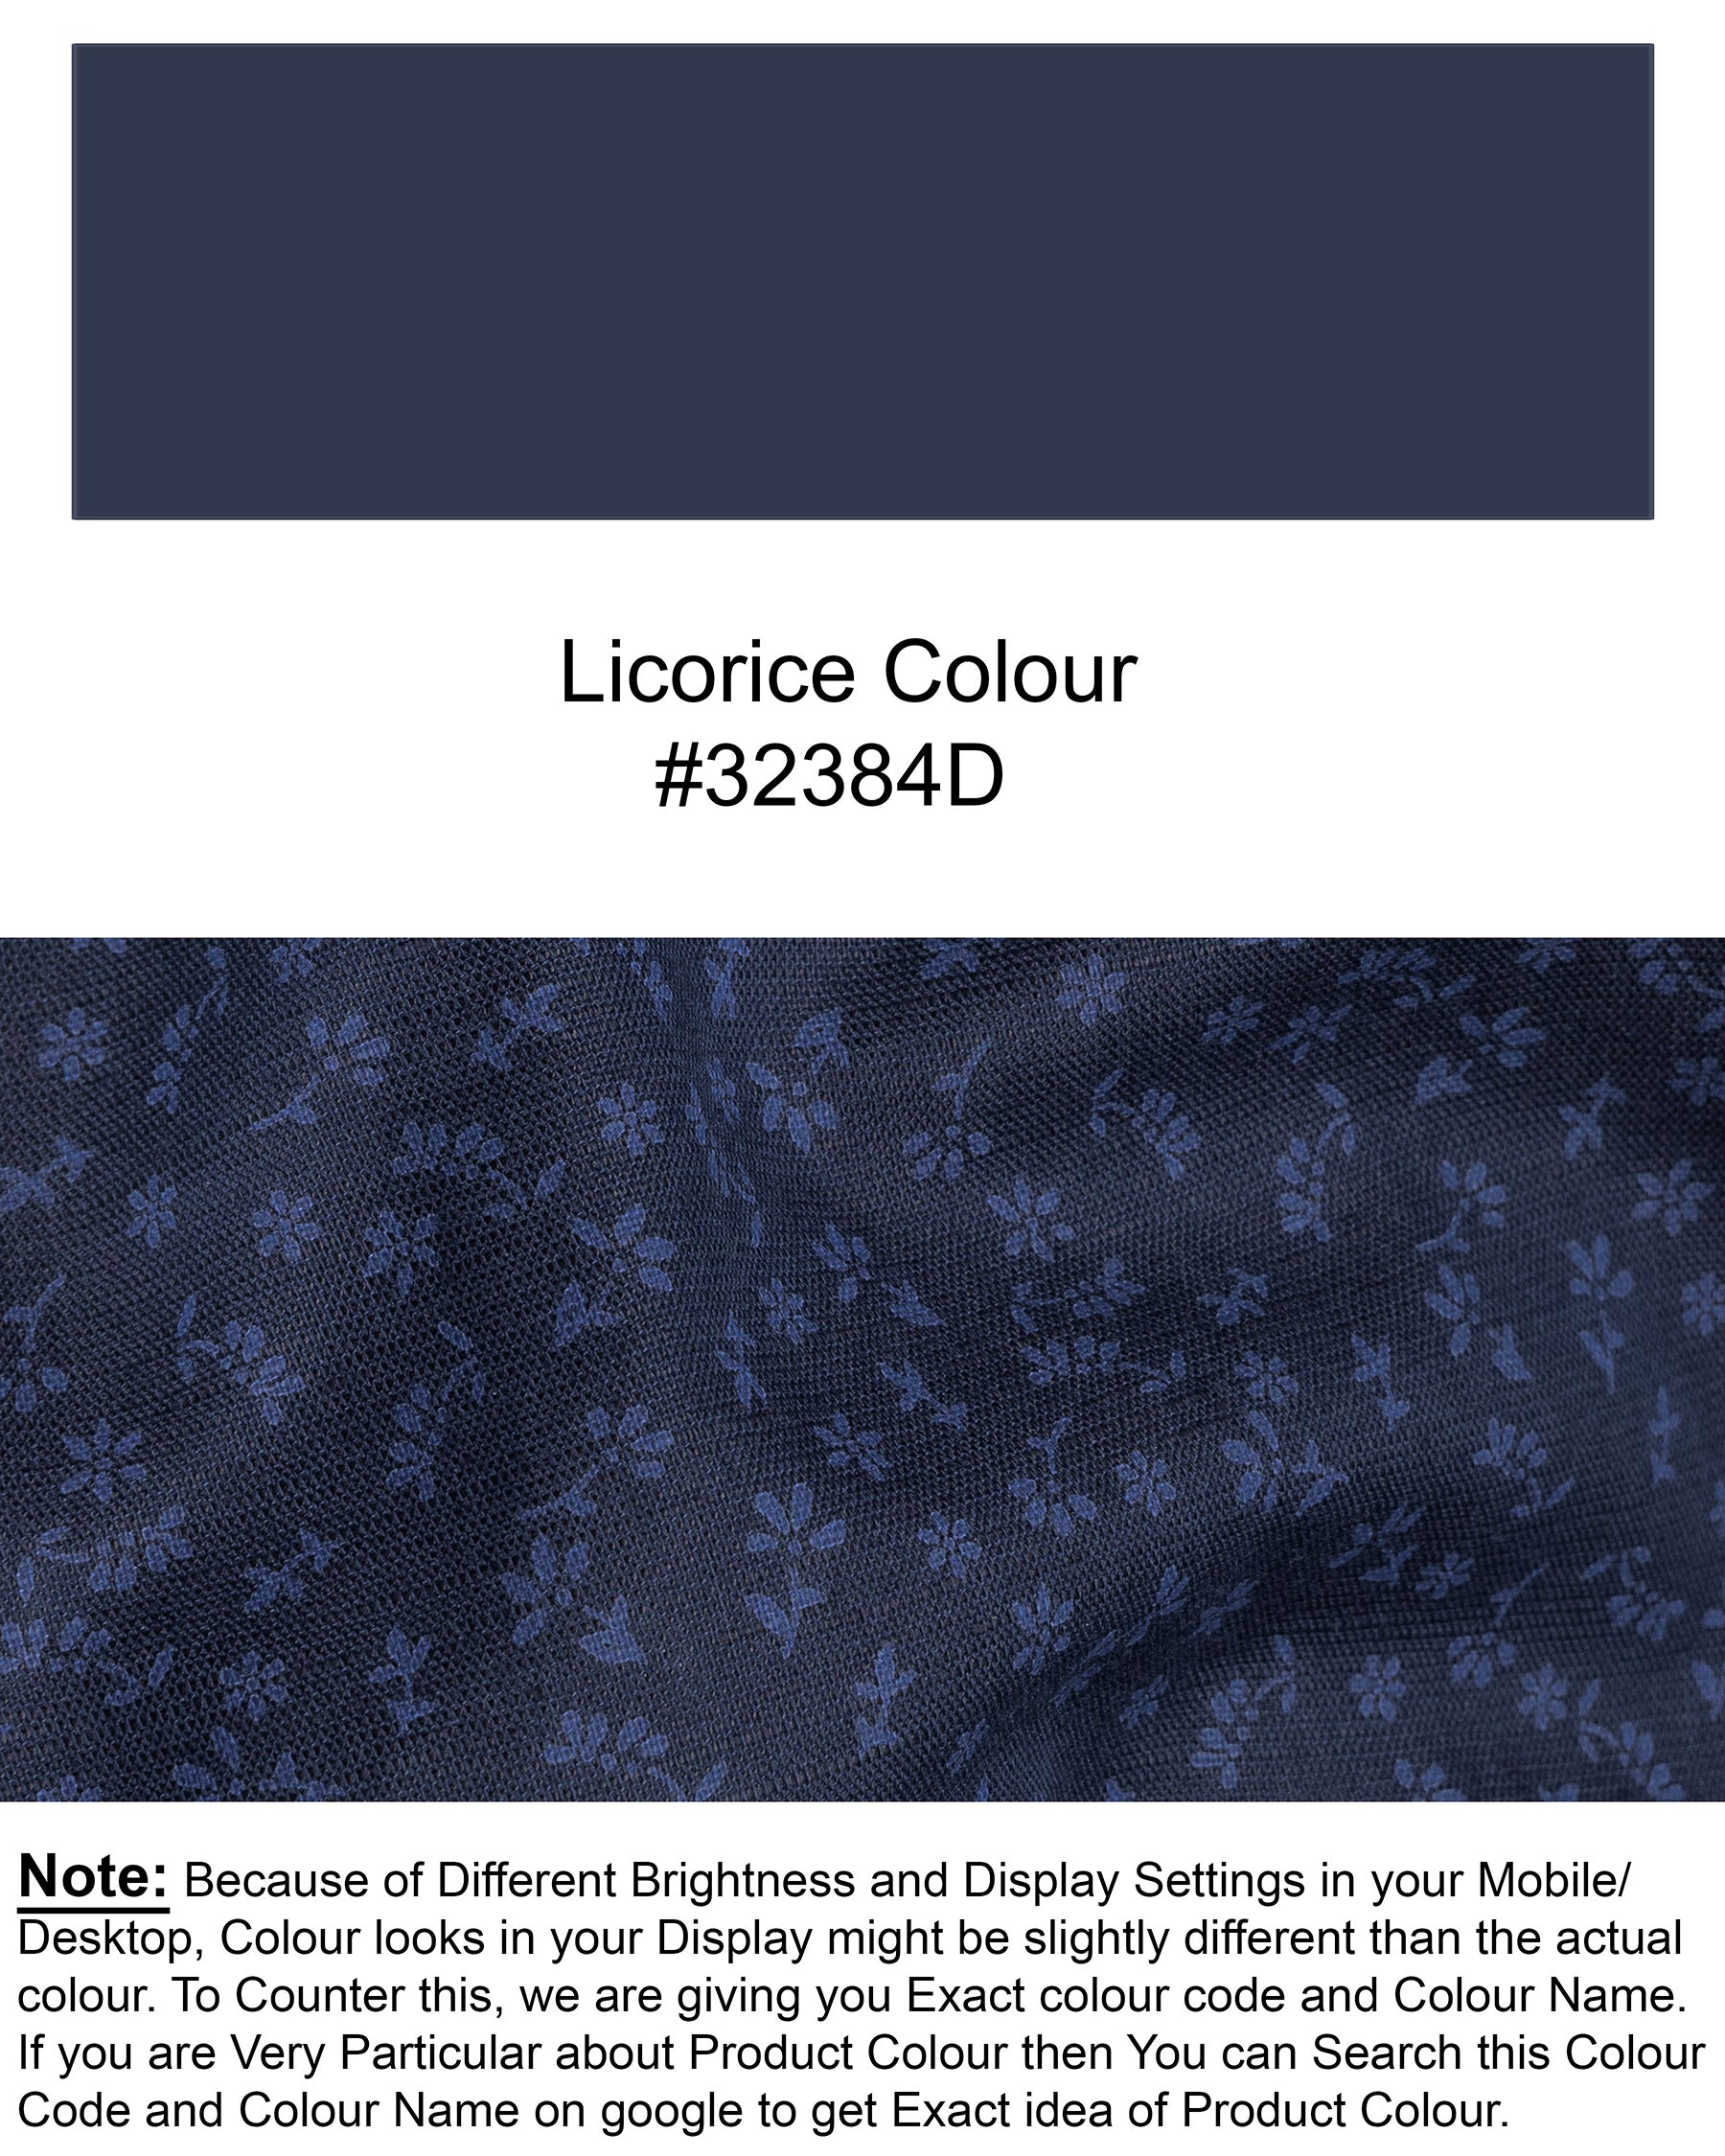 Licorice Blue Floral Printed Luxurious Linen Shirt 5525-BD-BLE-38, 5525-BD-BLE-H-38, 5525-BD-BLE-39, 5525-BD-BLE-H-39, 5525-BD-BLE-40, 5525-BD-BLE-H-40, 5525-BD-BLE-42, 5525-BD-BLE-H-42, 5525-BD-BLE-44, 5525-BD-BLE-H-44, 5525-BD-BLE-46, 5525-BD-BLE-H-46, 5525-BD-BLE-48, 5525-BD-BLE-H-48, 5525-BD-BLE-50, 5525-BD-BLE-H-50, 5525-BD-BLE-52, 5525-BD-BLE-H-52